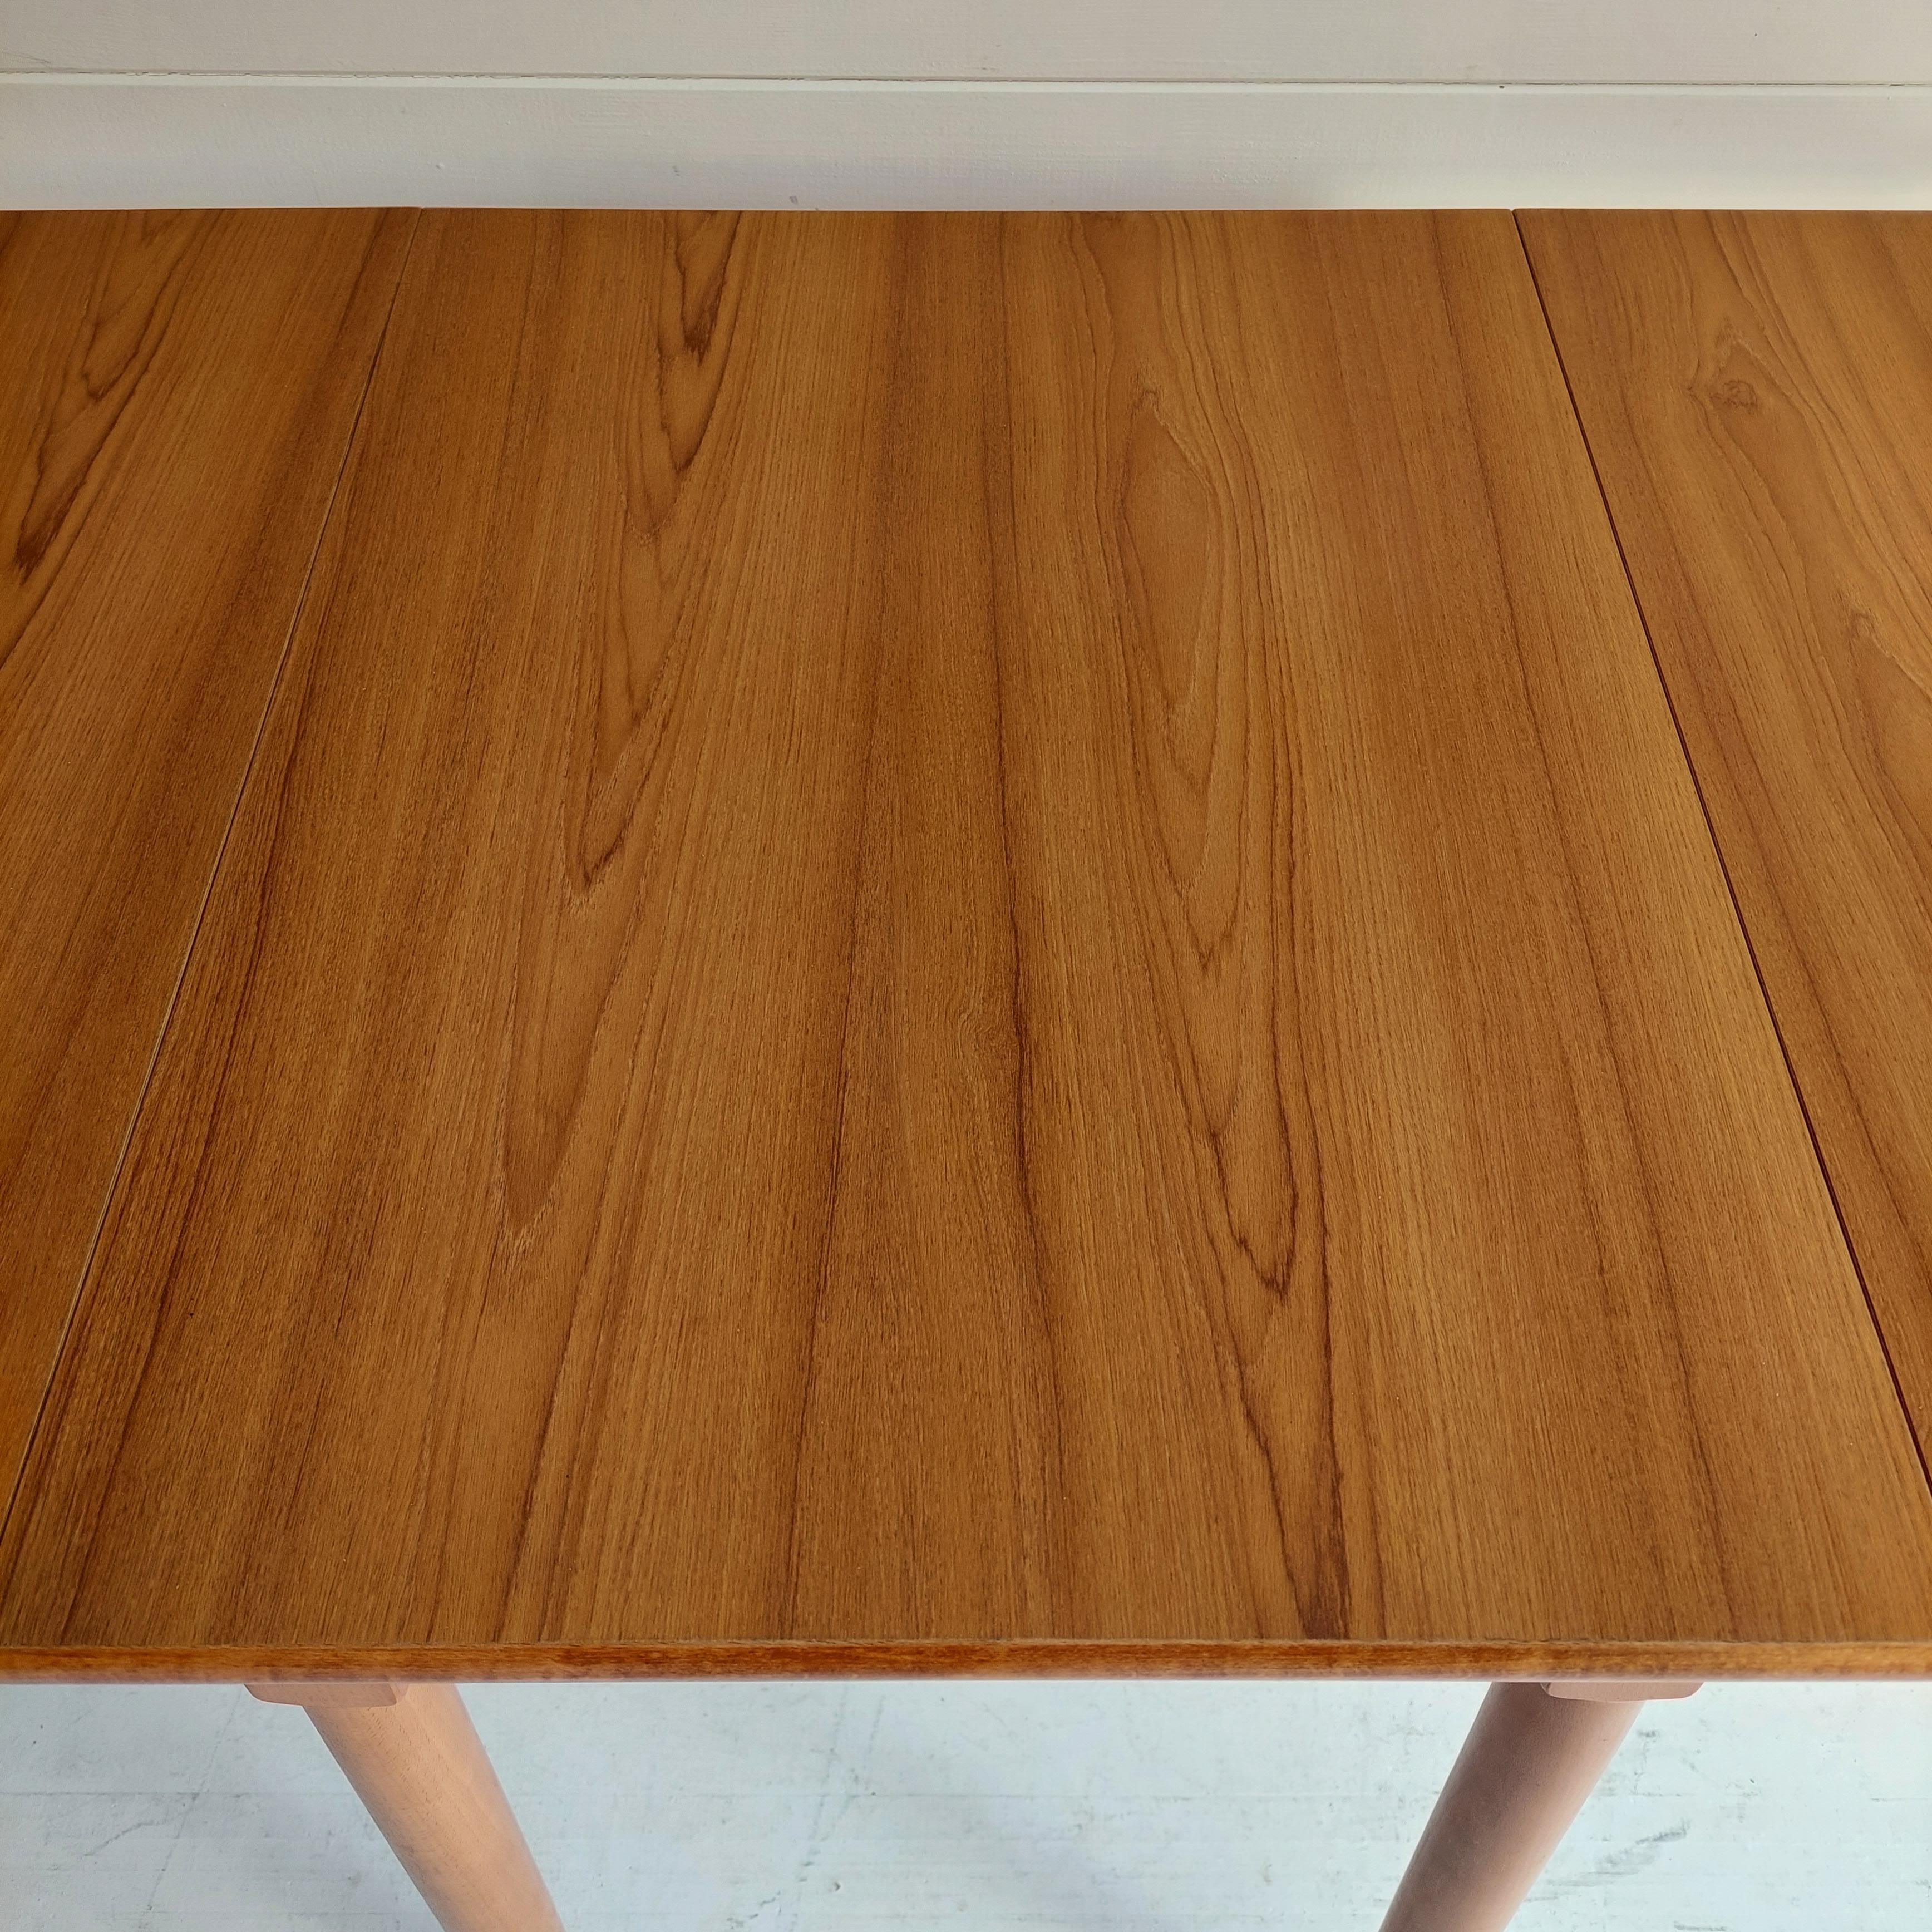 Late Mid-Century Wood Effect Laminate Drop Leaf Kitchen Dining Table 3